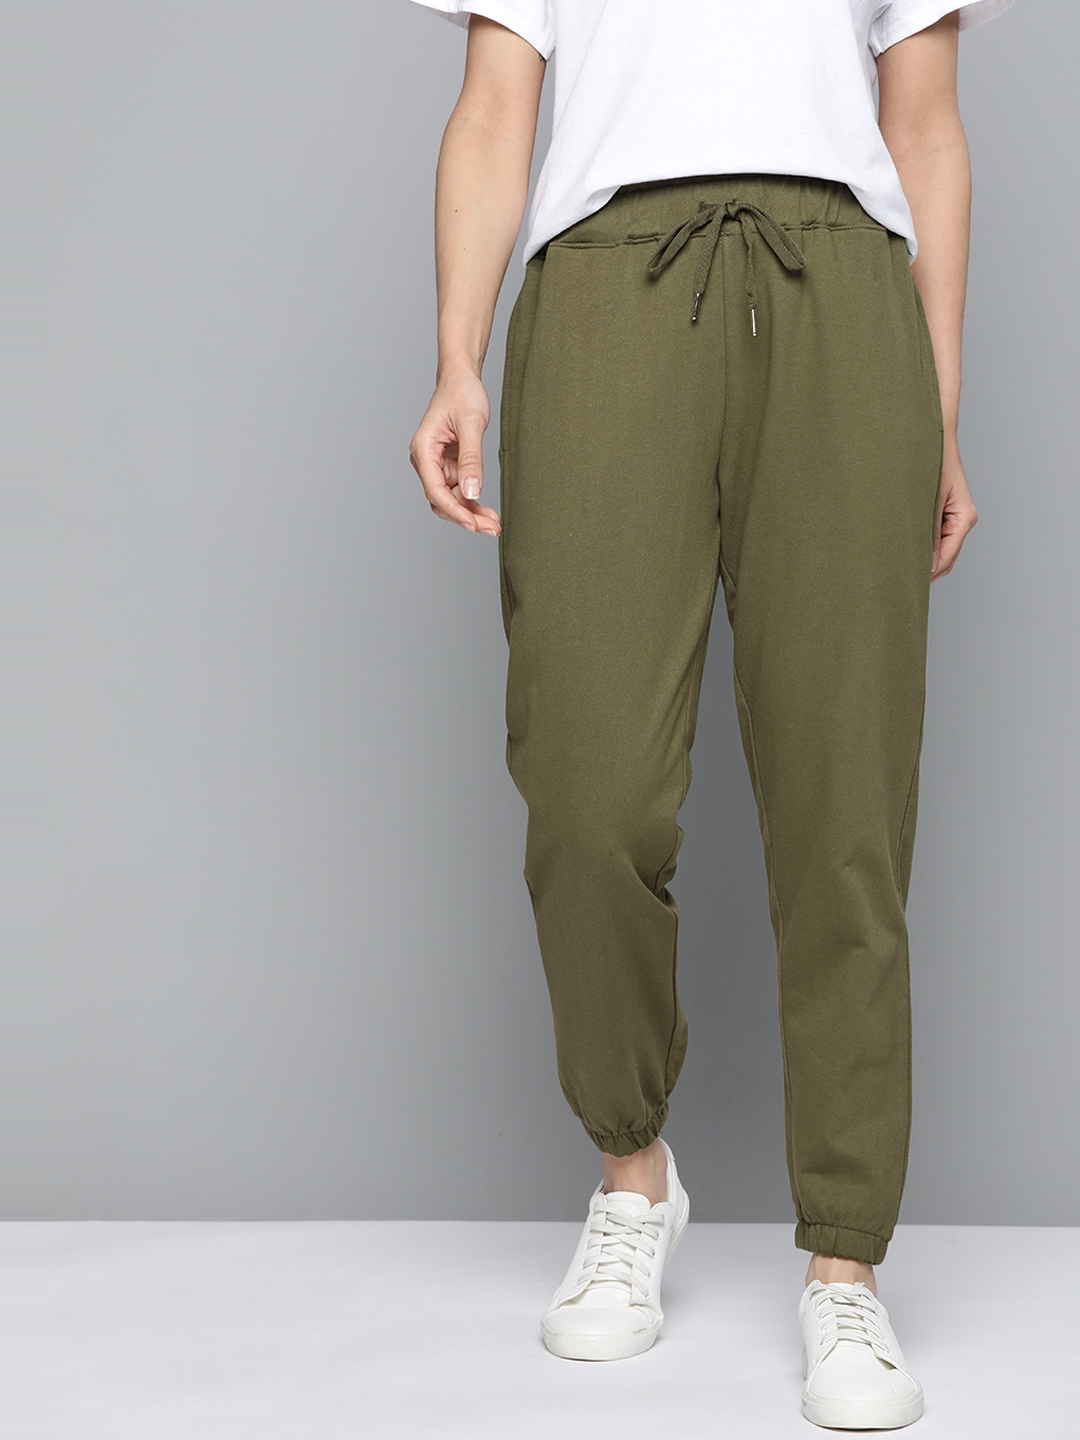 Go Colors Joggers  Buy Go Colors Women Solid Cotton Olive Green Cuffed  Joggers Online  Nykaa Fashion